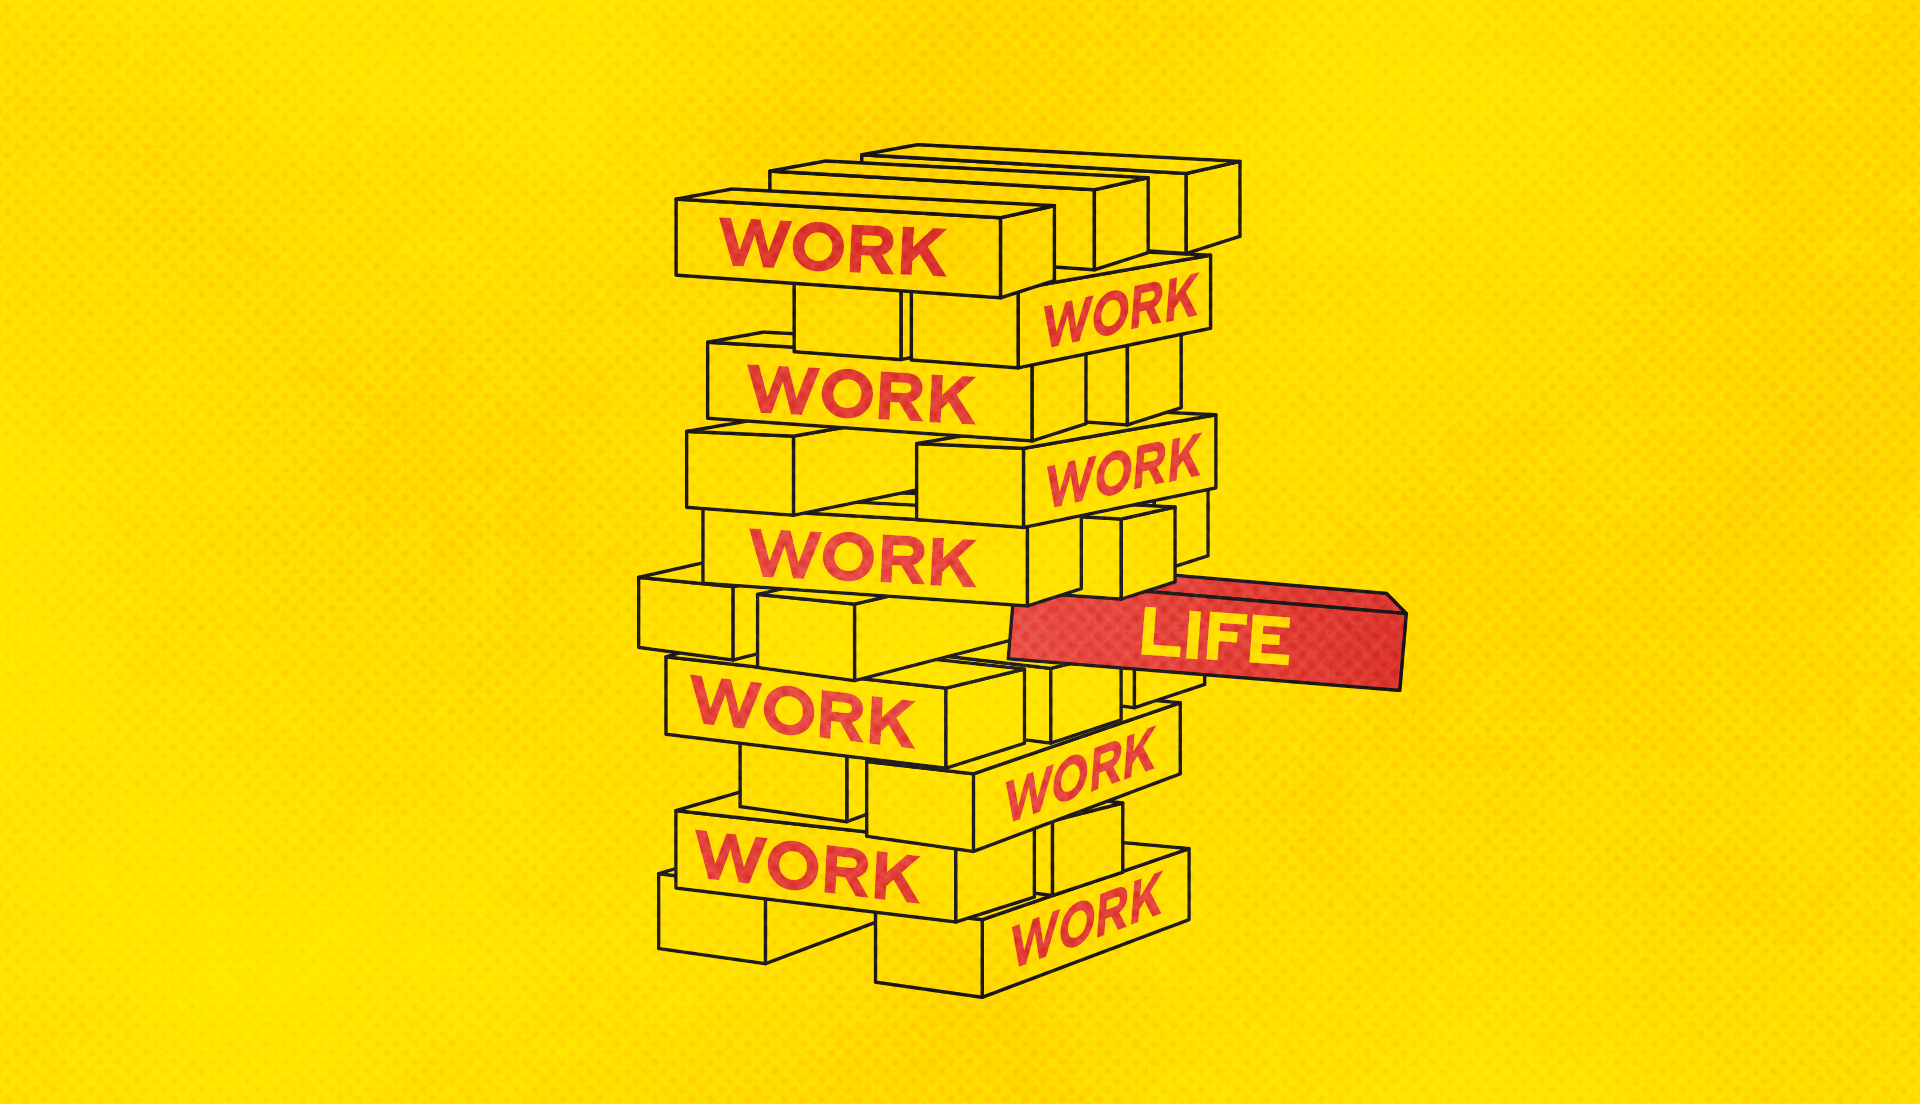 Chief. Are We Headed for a Work Life Balance Revolution? (Hint: Not Likely.)